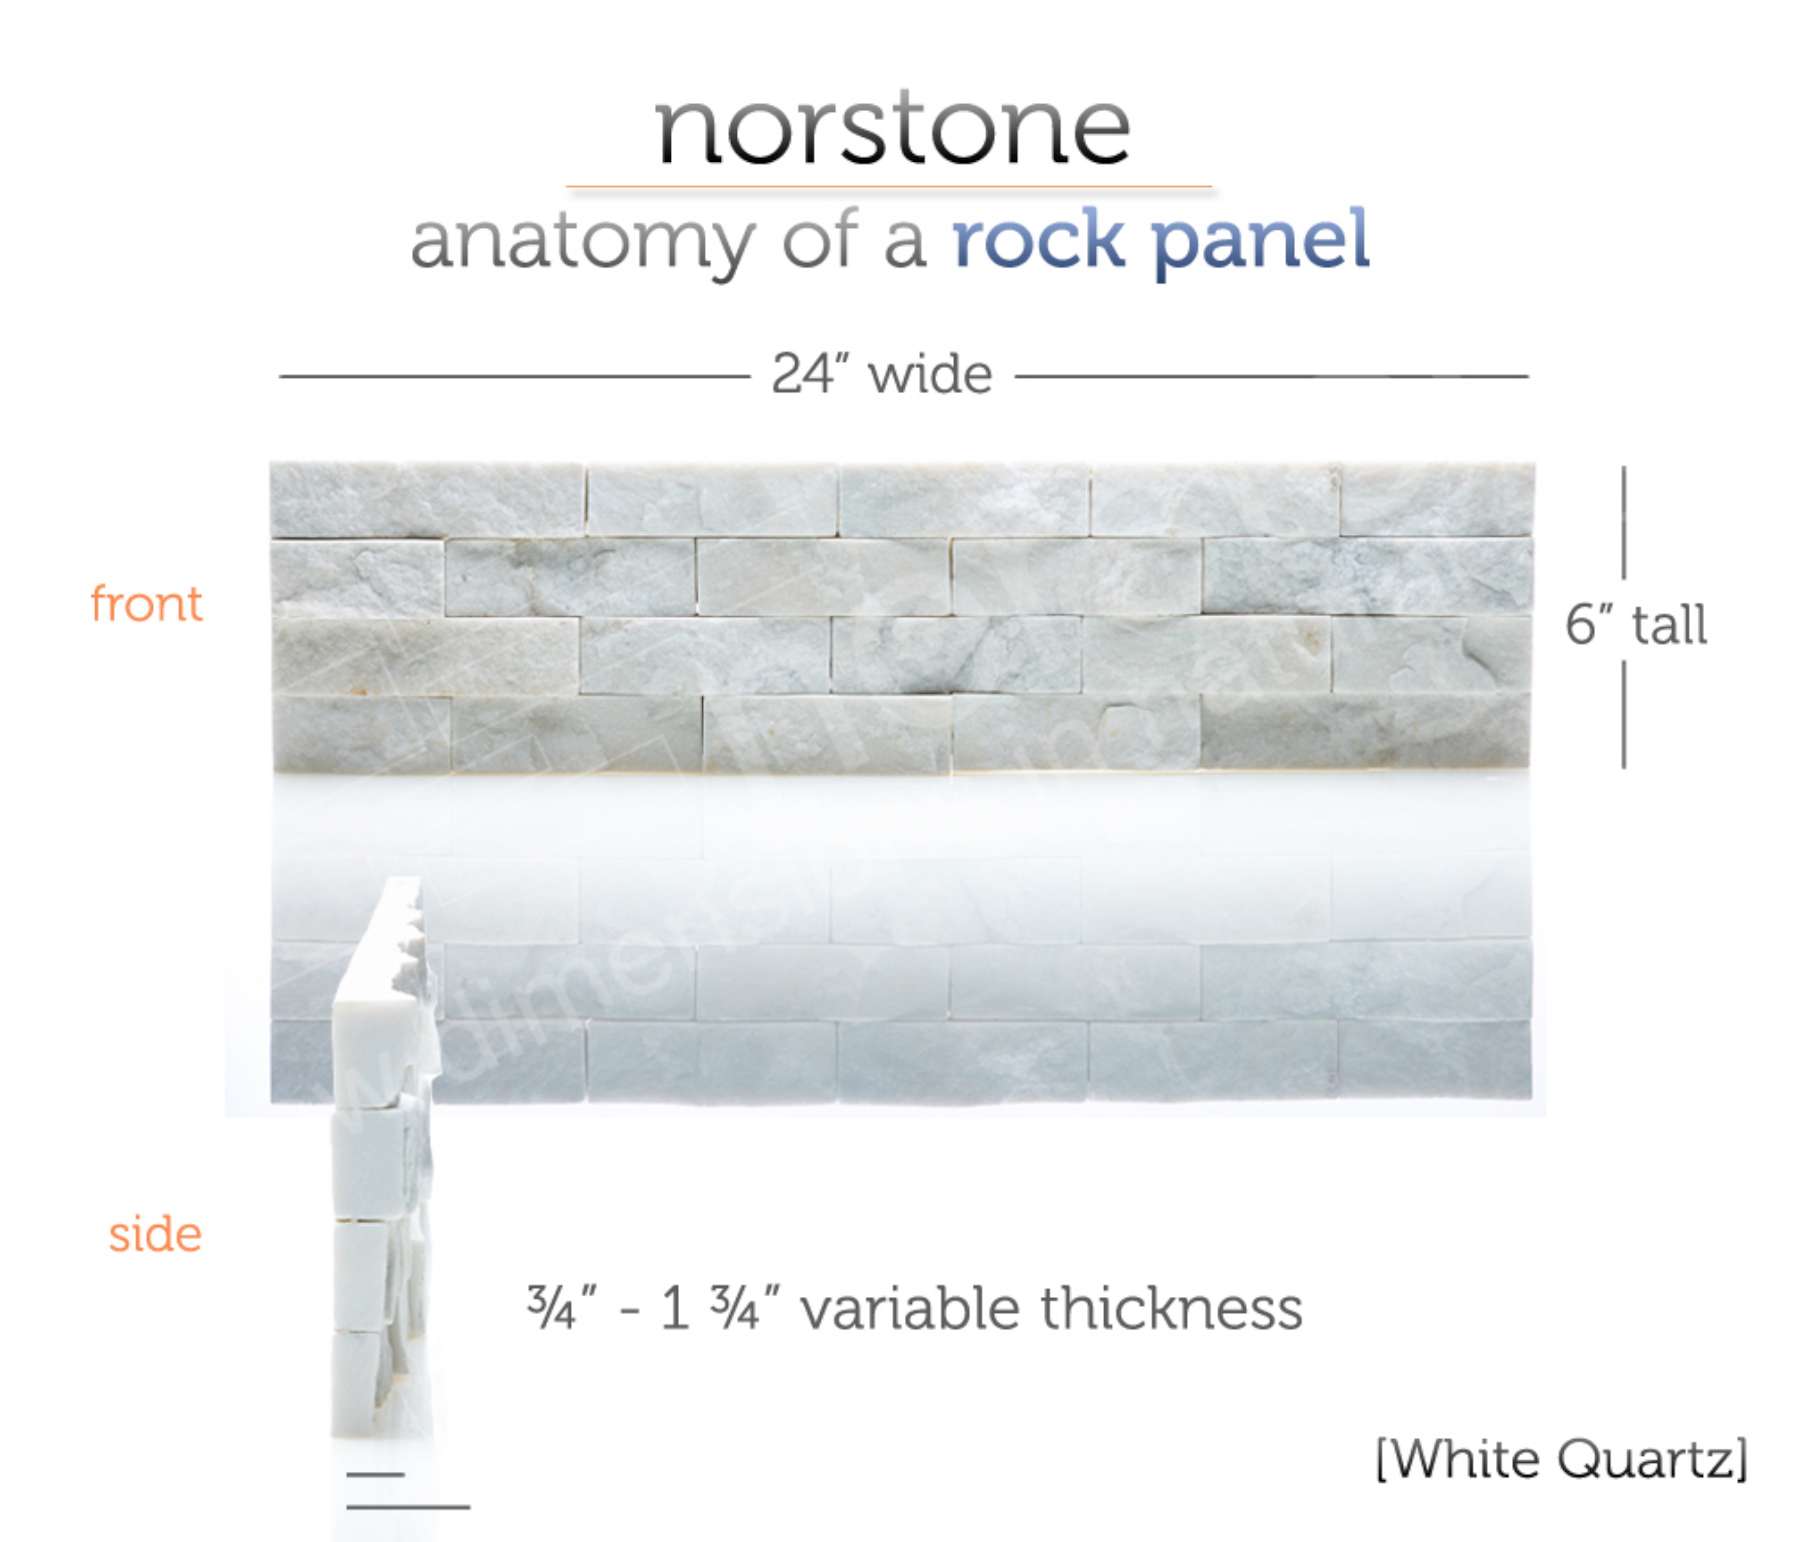 Product Detail of Norstone USA White Rock Panel showing front and profile view of a single field panel with dimensions listed